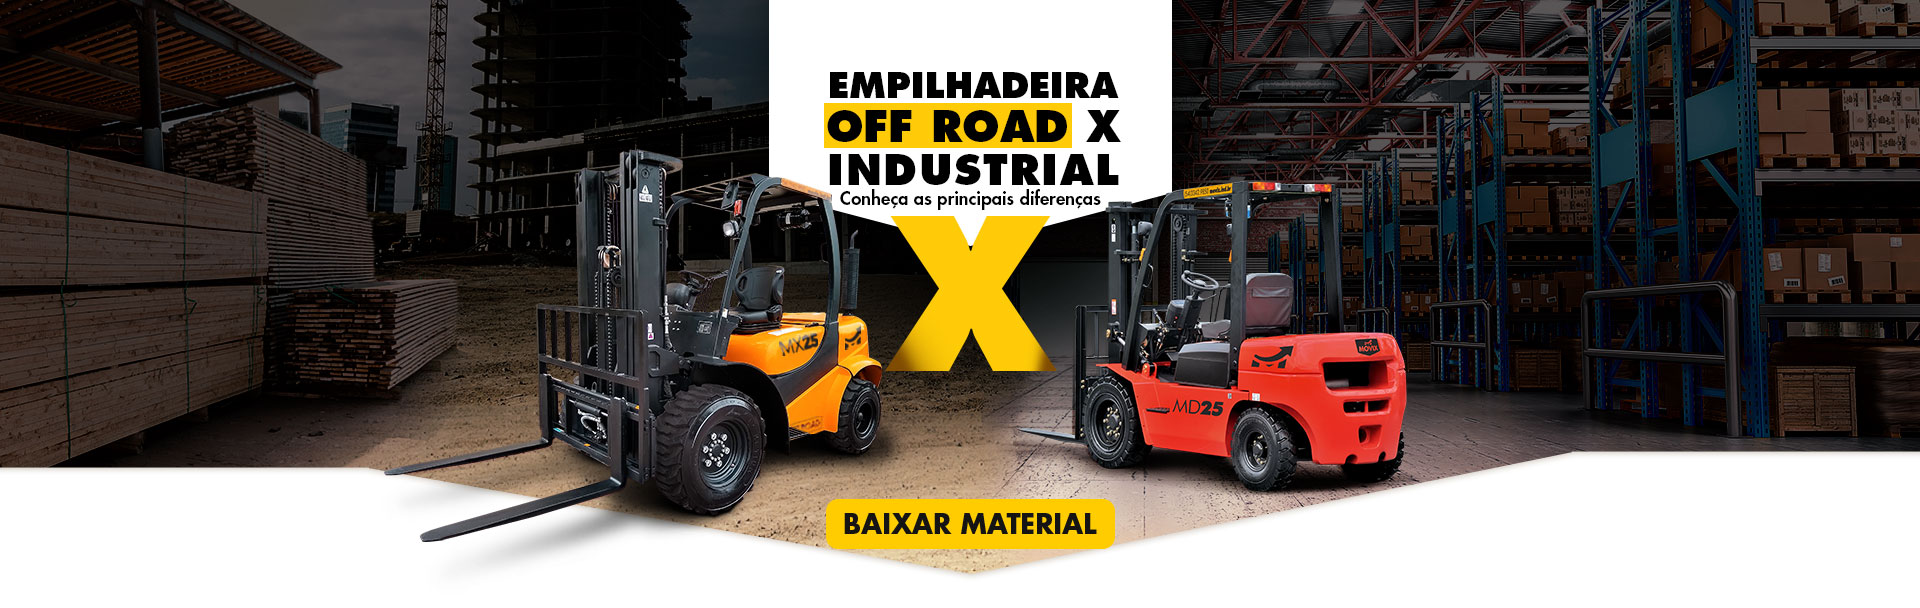 empilhadeira off road x industrial